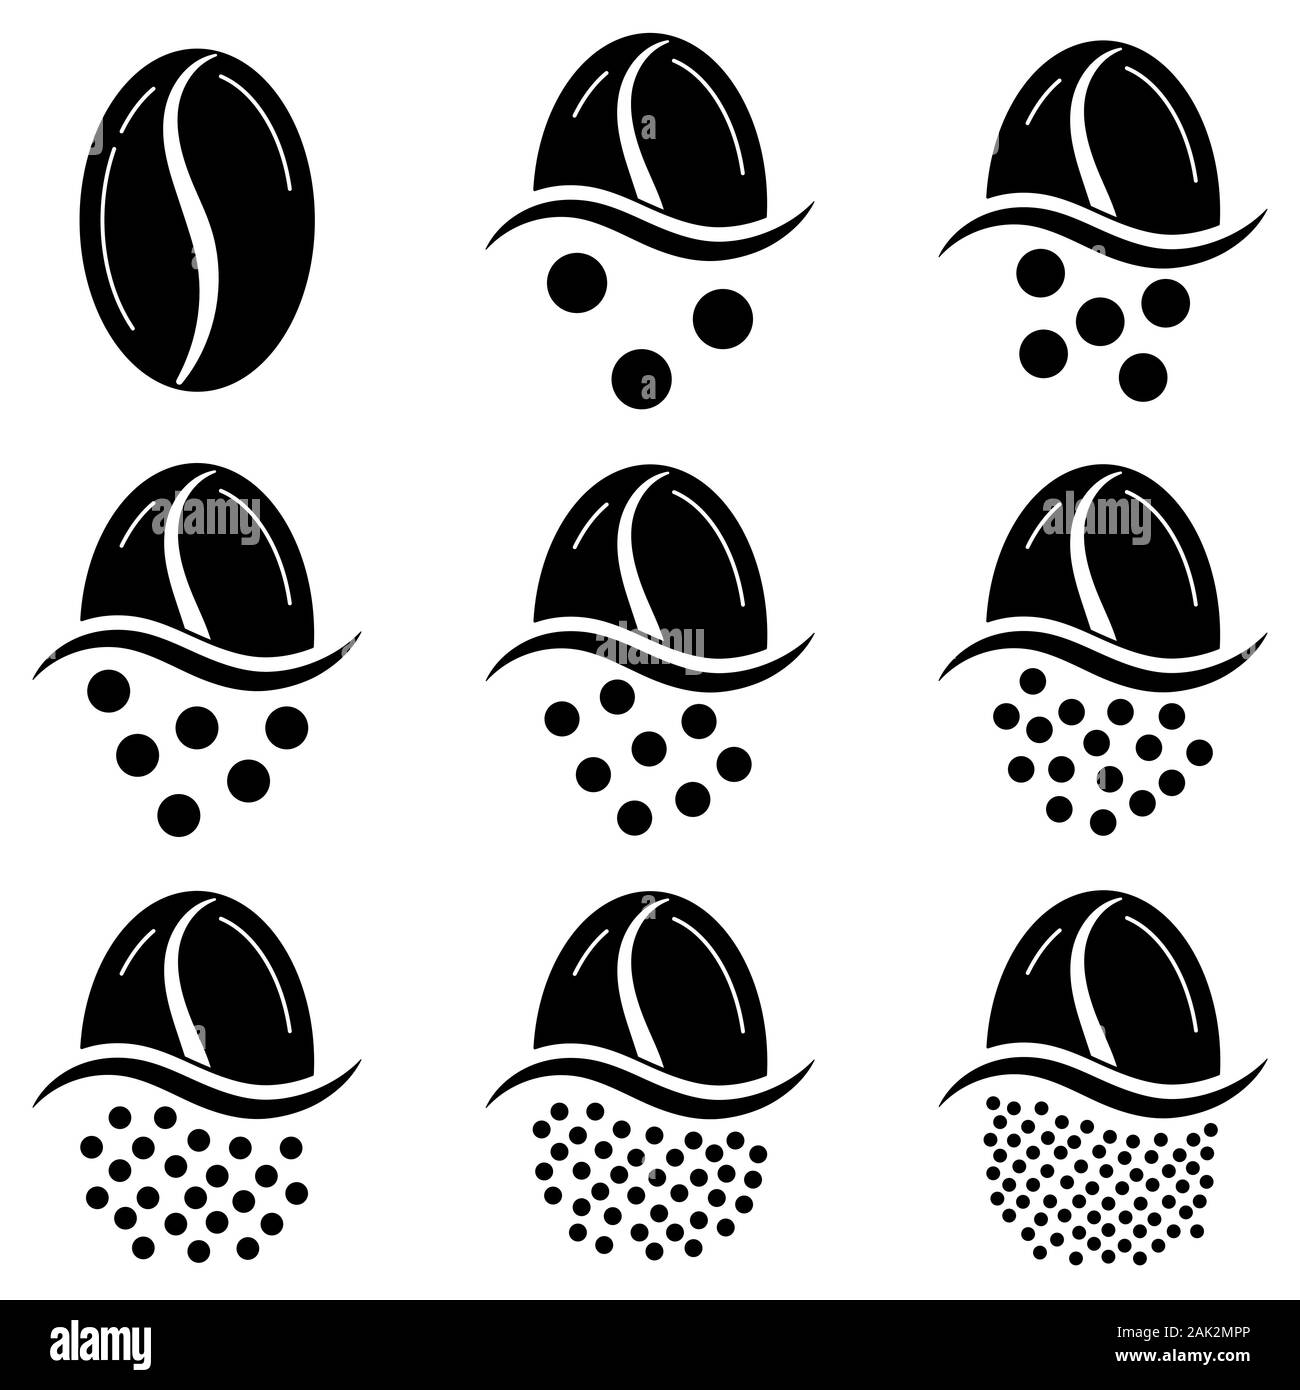 Coffee grind size chart grains icon set isolated on white background. Stock Vector